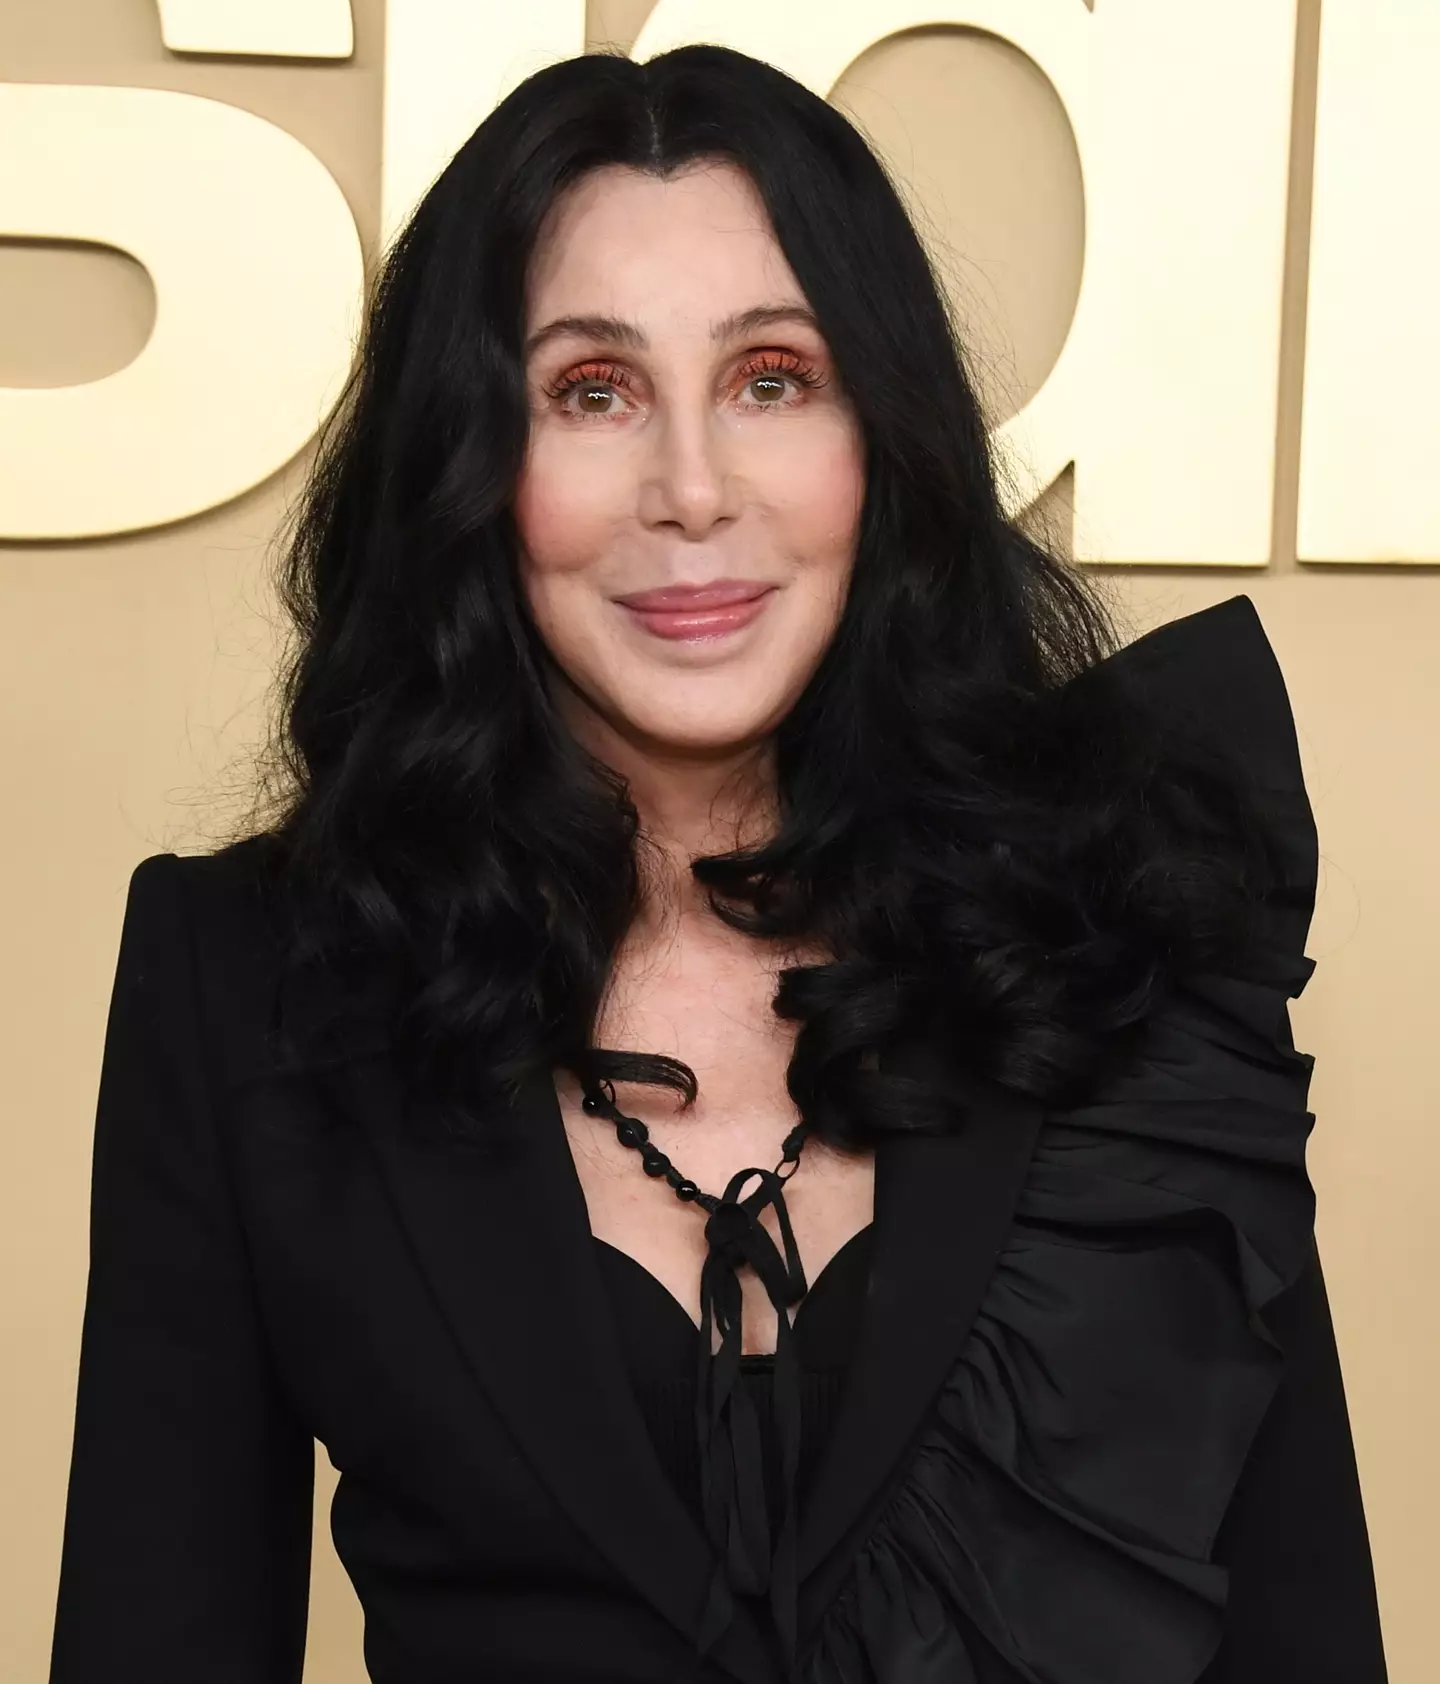 Cher turned 77 this year.